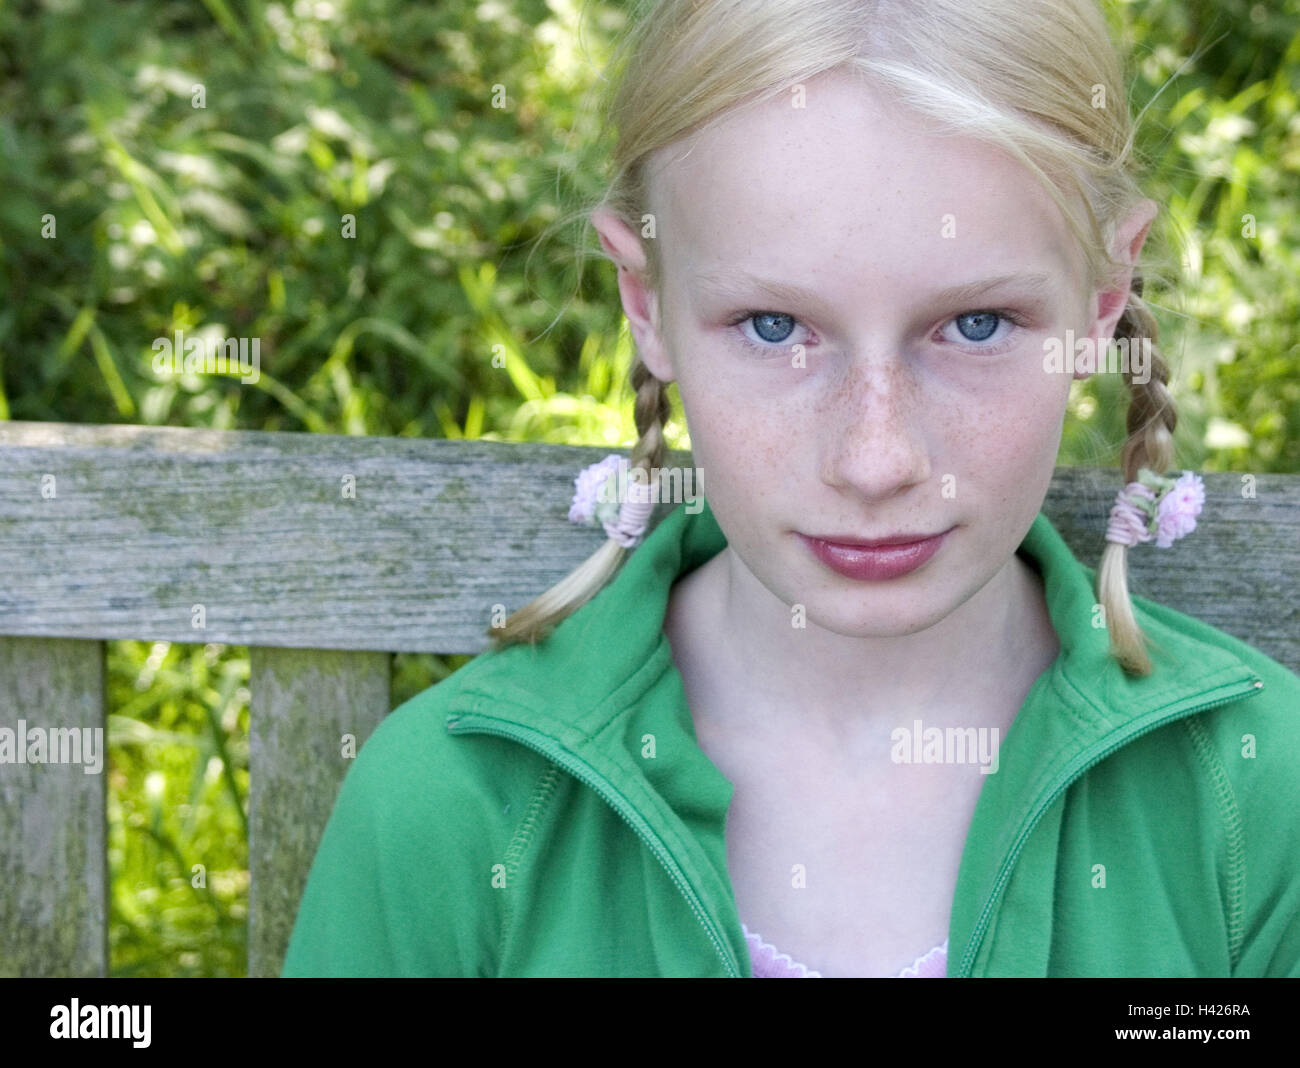 Portrait Of A 10 Years Old Pretty Girl Child Teenager Face Hair Beauty Fun  Eyes Freckles High-Res Stock Photo - Getty Images